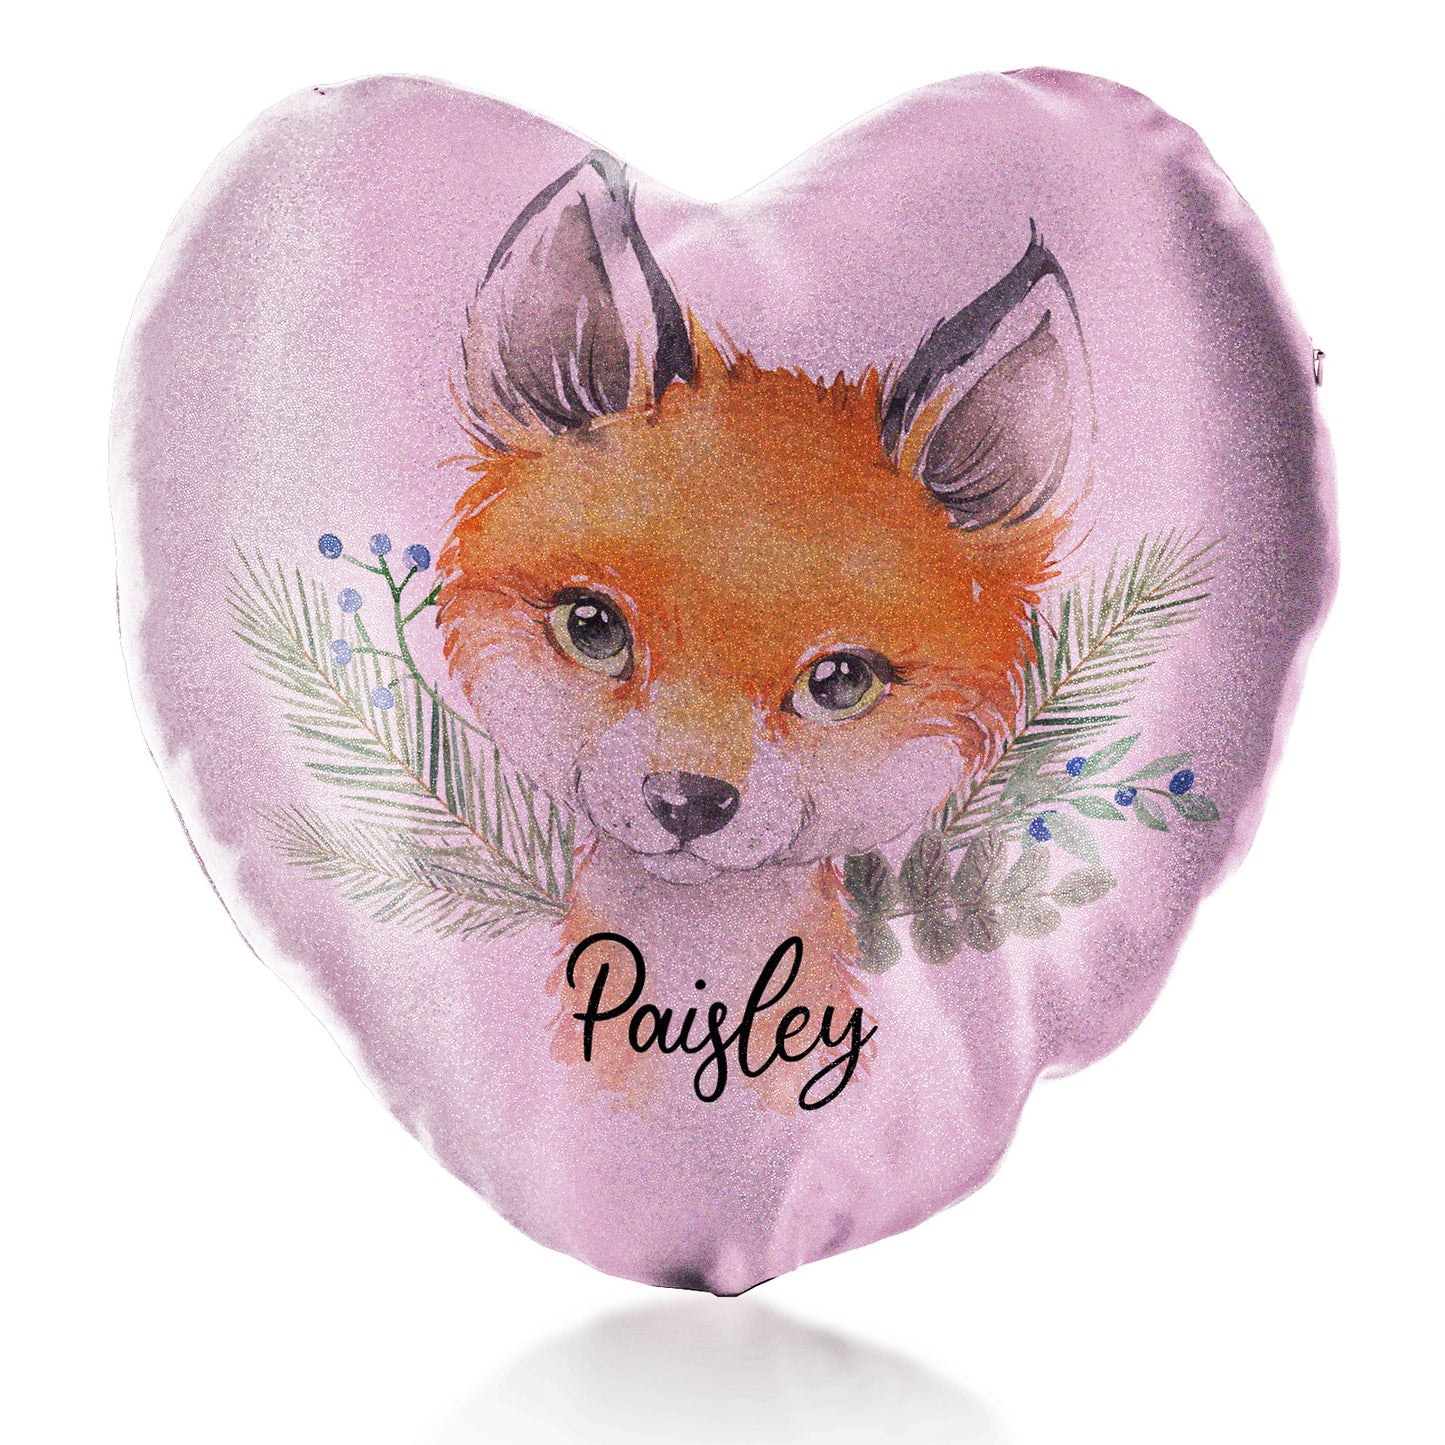 Personalised Glitter Heart Cushion with Red Fox Blue Berries and Cute Text